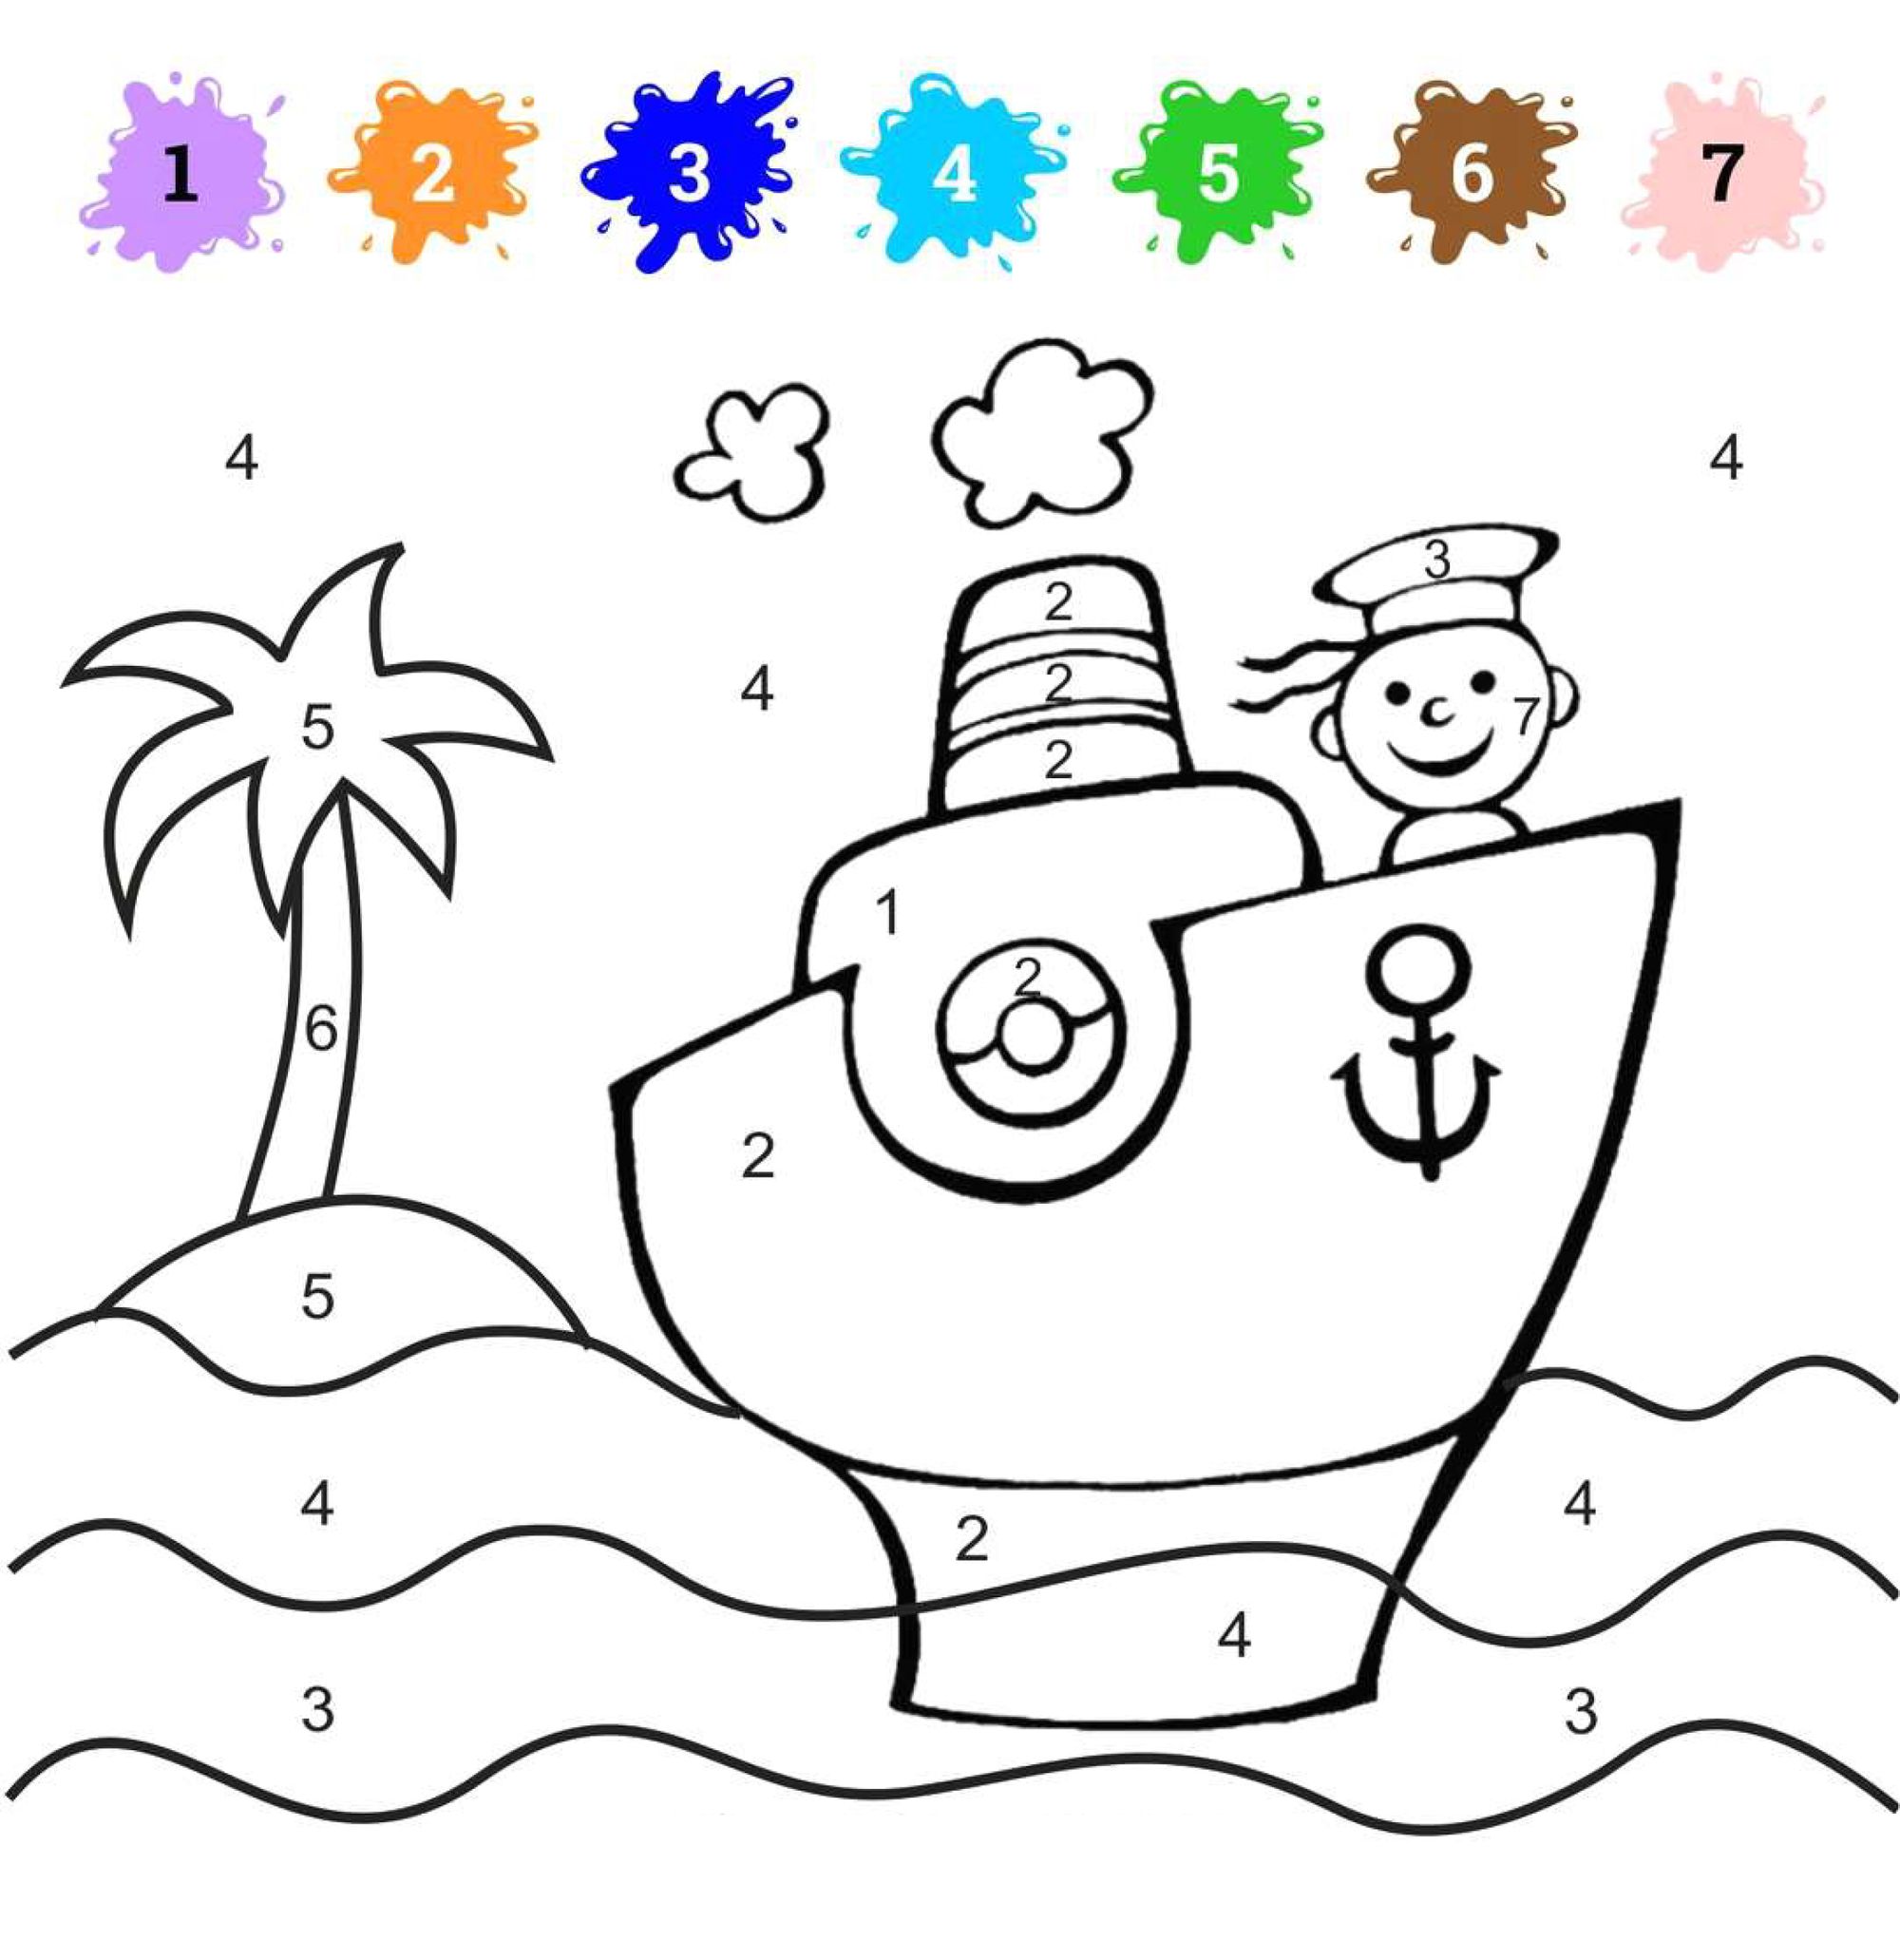 coloring-by-numbers-for-children